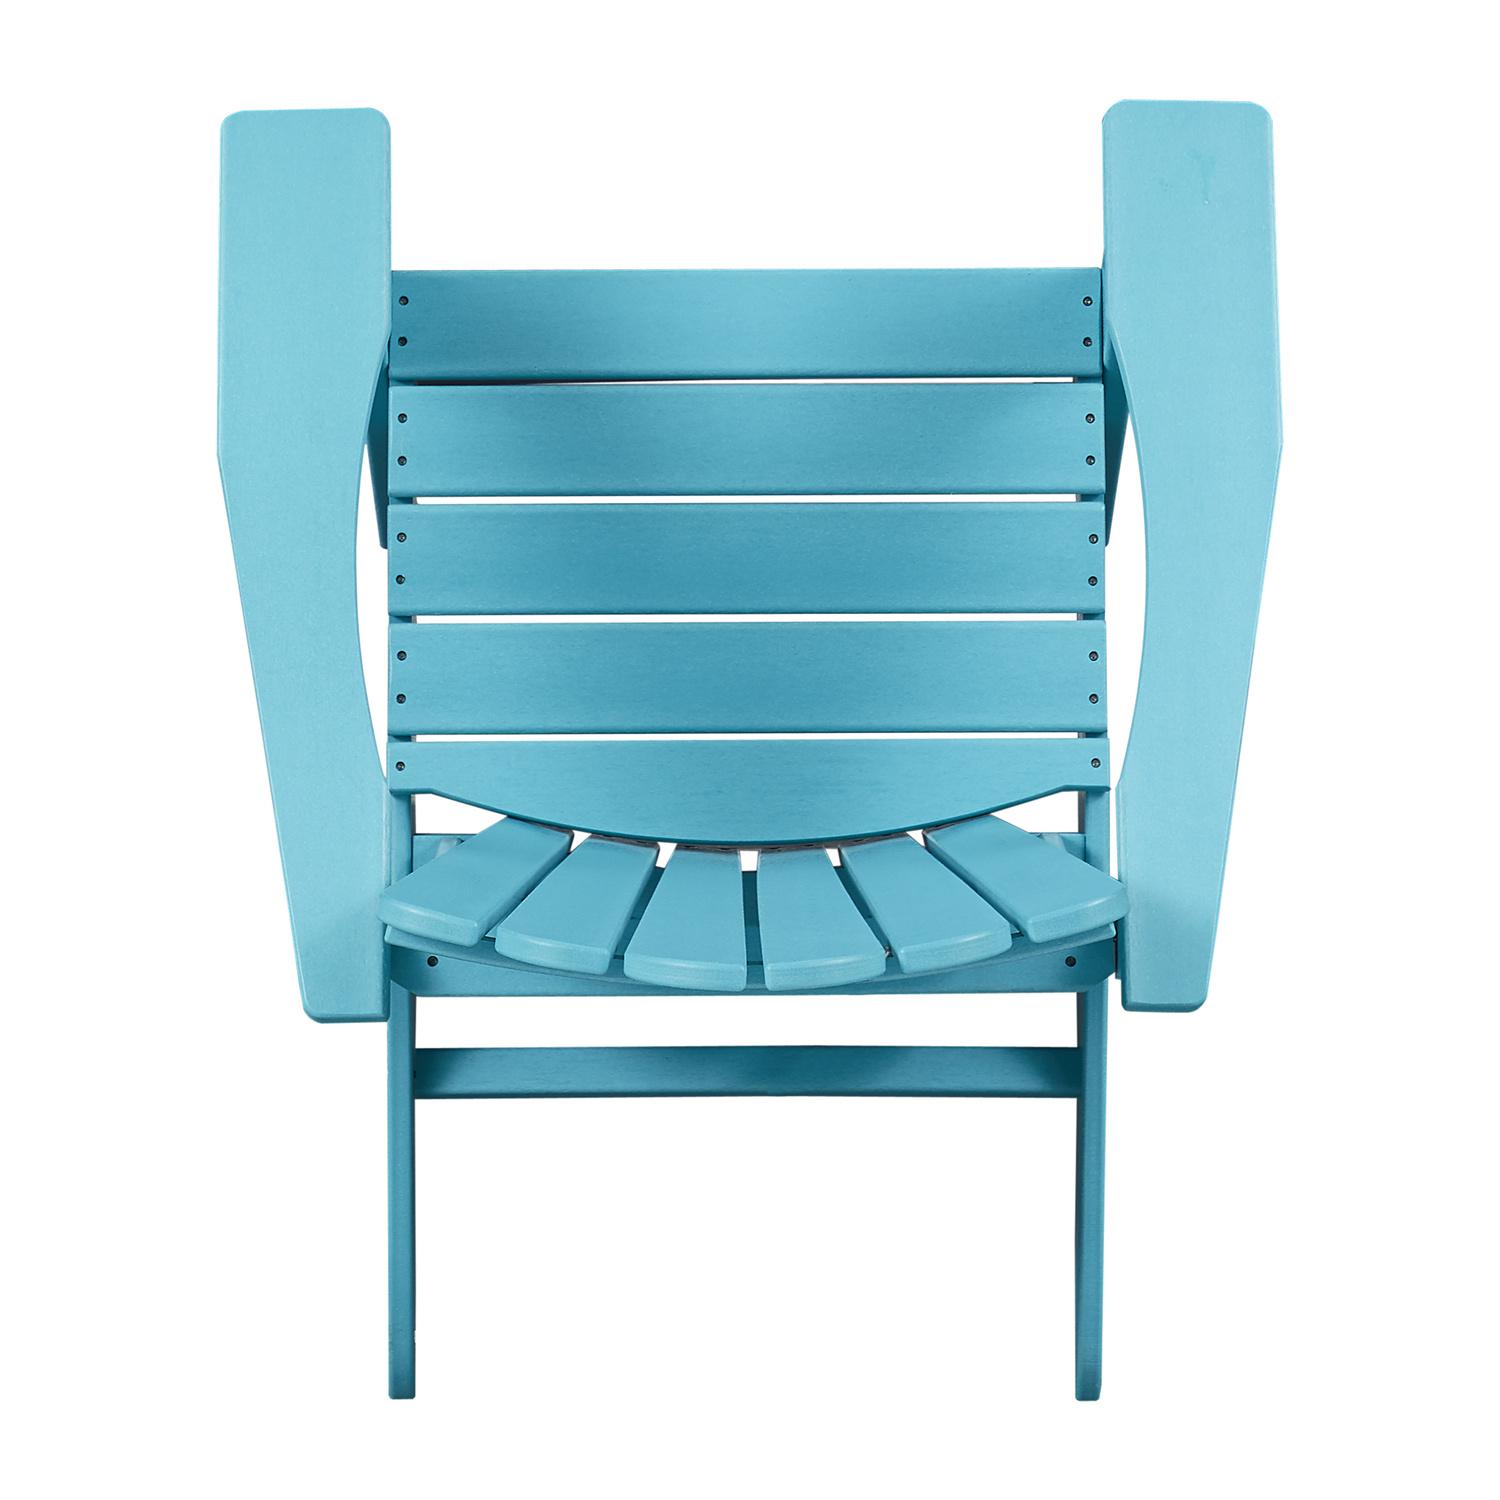 Adirondack Chair Patio Chairs Lawn Chair Outdoor Chairs Painted Chair Weather Resistant for Patio Deck Garden, Backyard Deck, Fire Pit & Lawn Furniture Porch and Lawn Seating- Blue - image 5 of 7